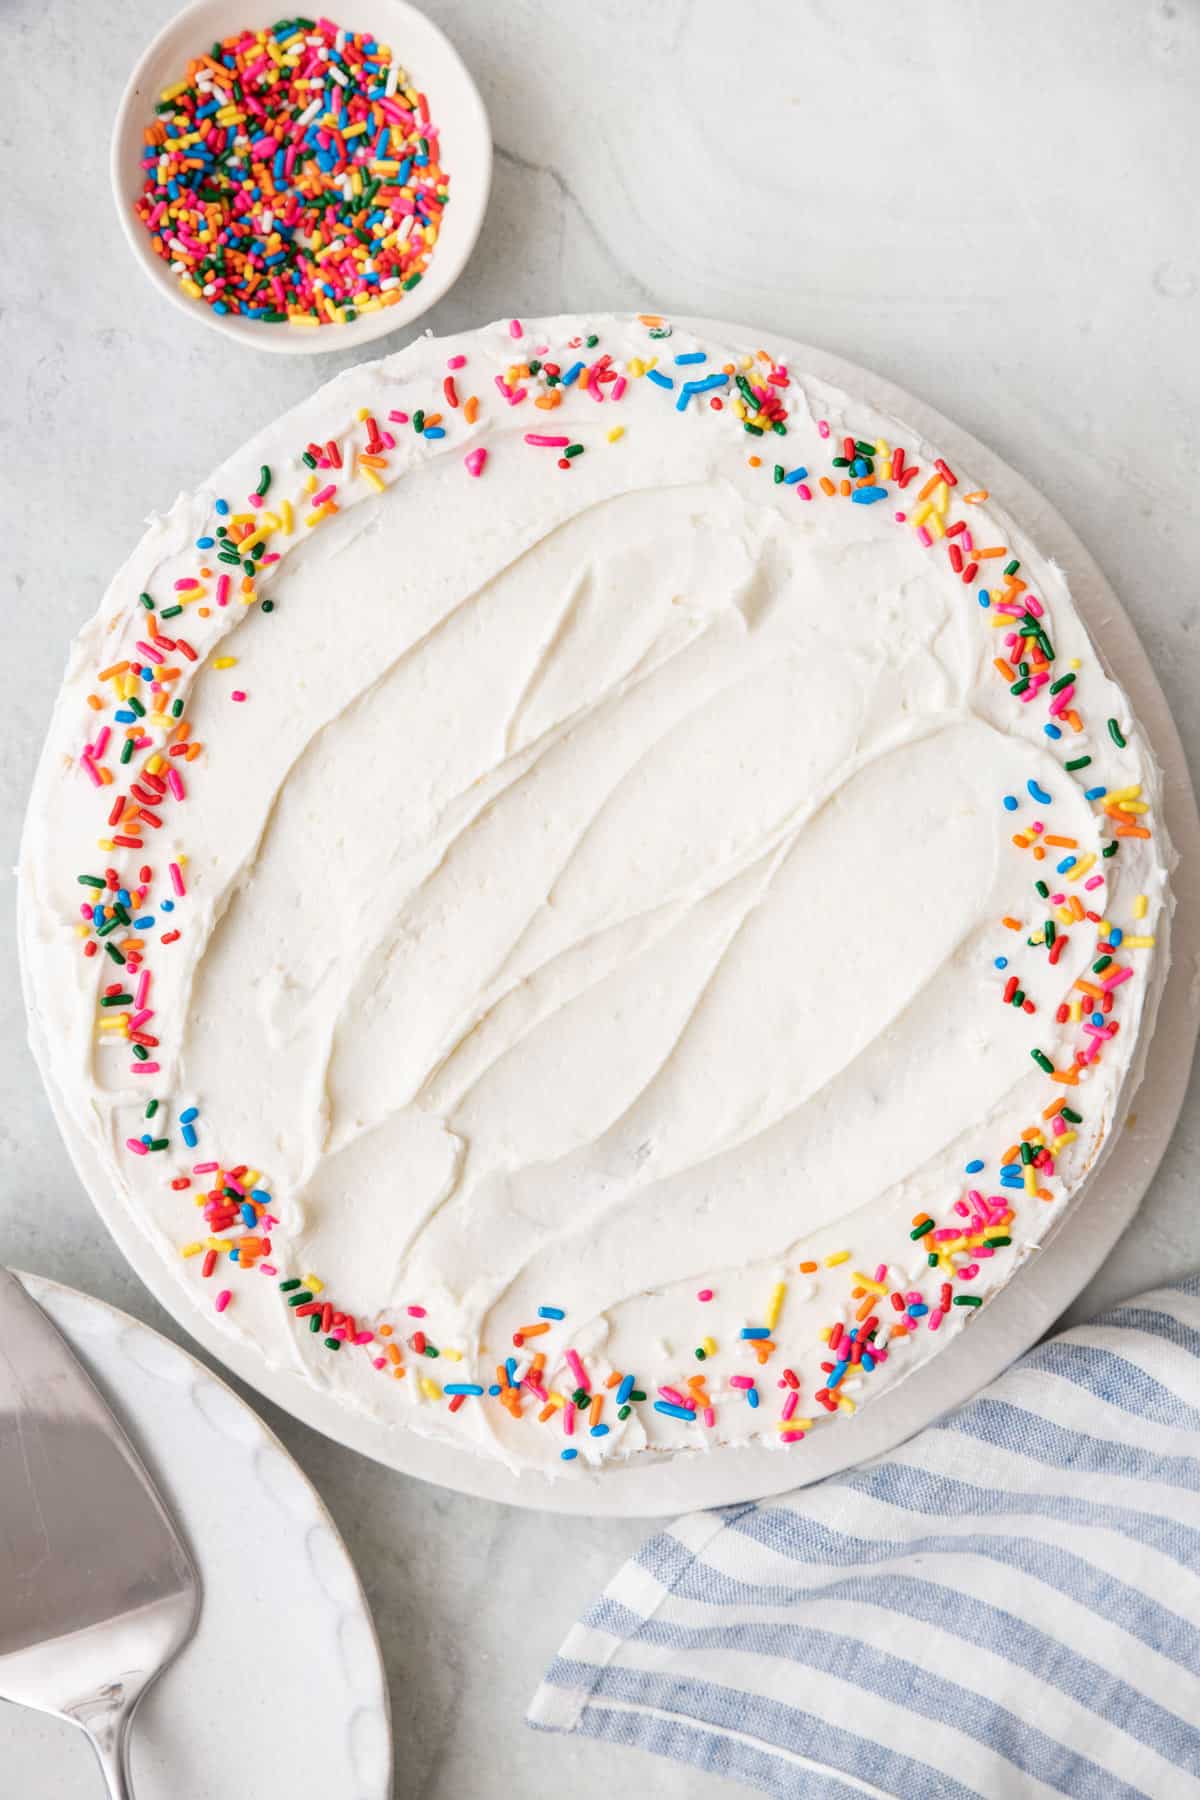 Overhead shot of a frosted cake with sprinles around edge and a small bowl of sprinkles nearby.